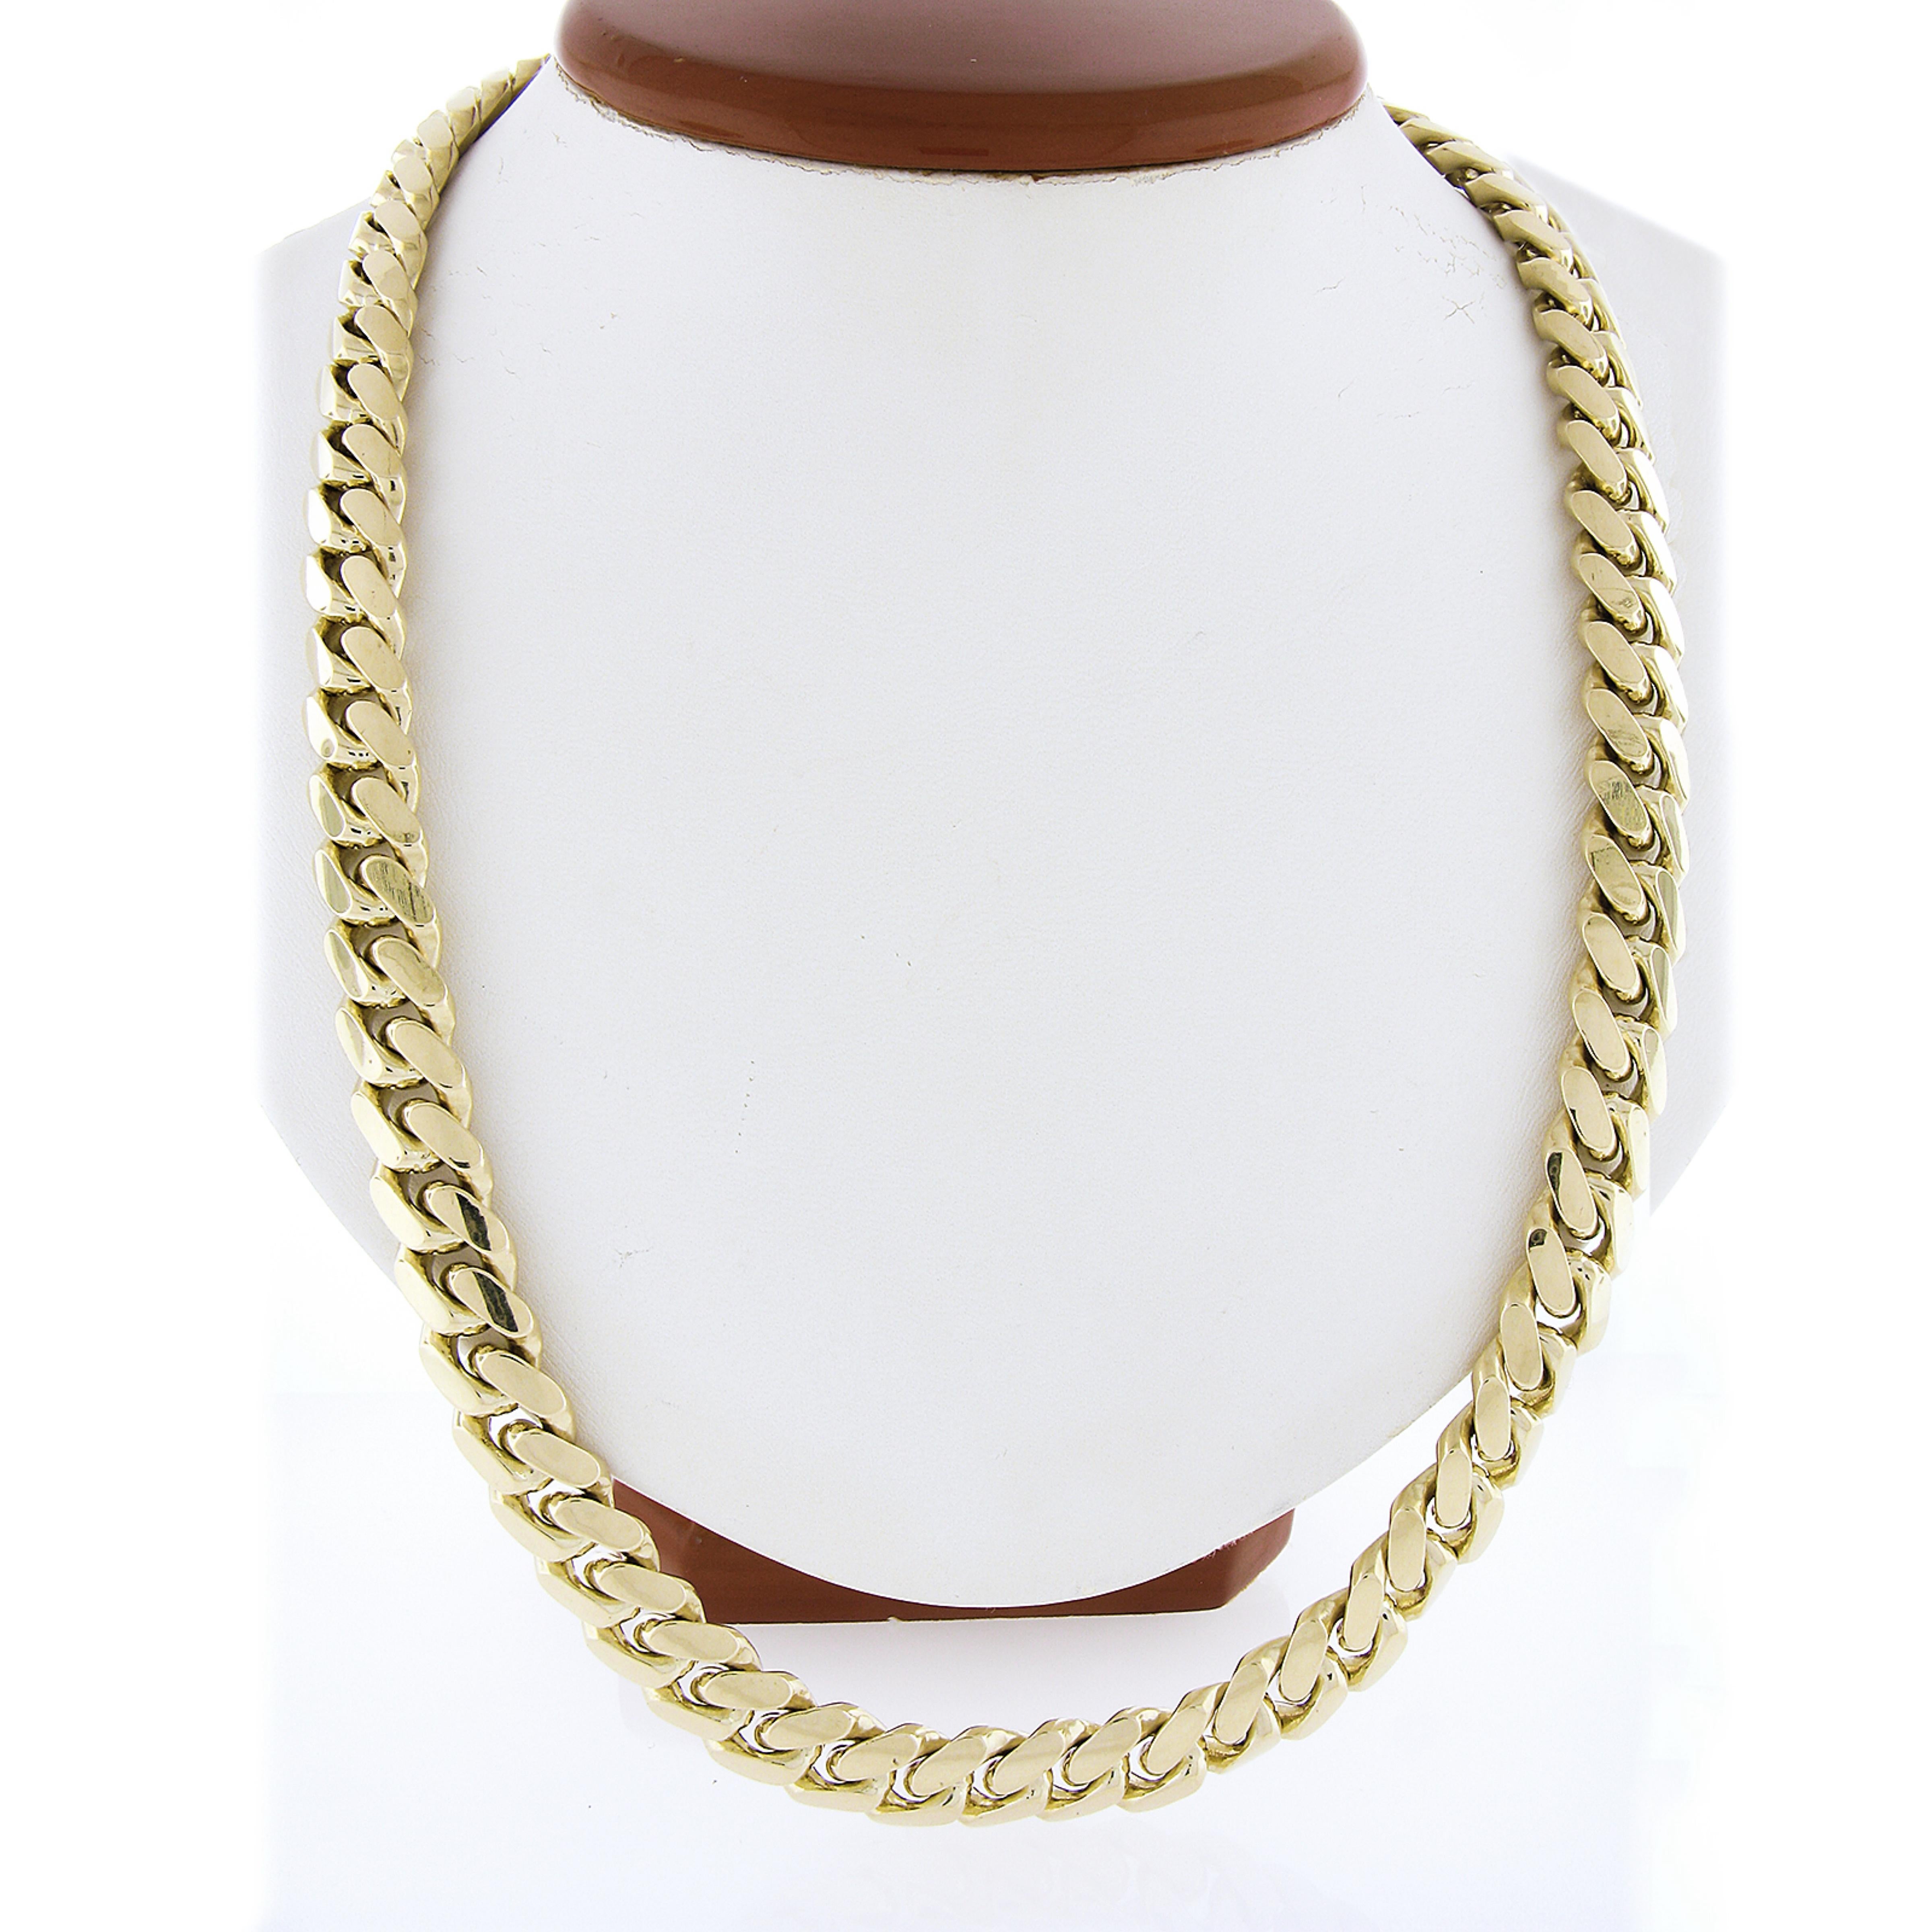 Material: Solid 14k Yellow Gold
Weight: 226.85 Grams
Chain Type: Miami Cuban Link Chain
Chain Length: 22 Inches
Chain Width: 11.5mm
Chain Thickness: 5.1mm
Clasp: Push Clasp w/ Dual Safety Latch
Condition: Shows some light surface scratches.